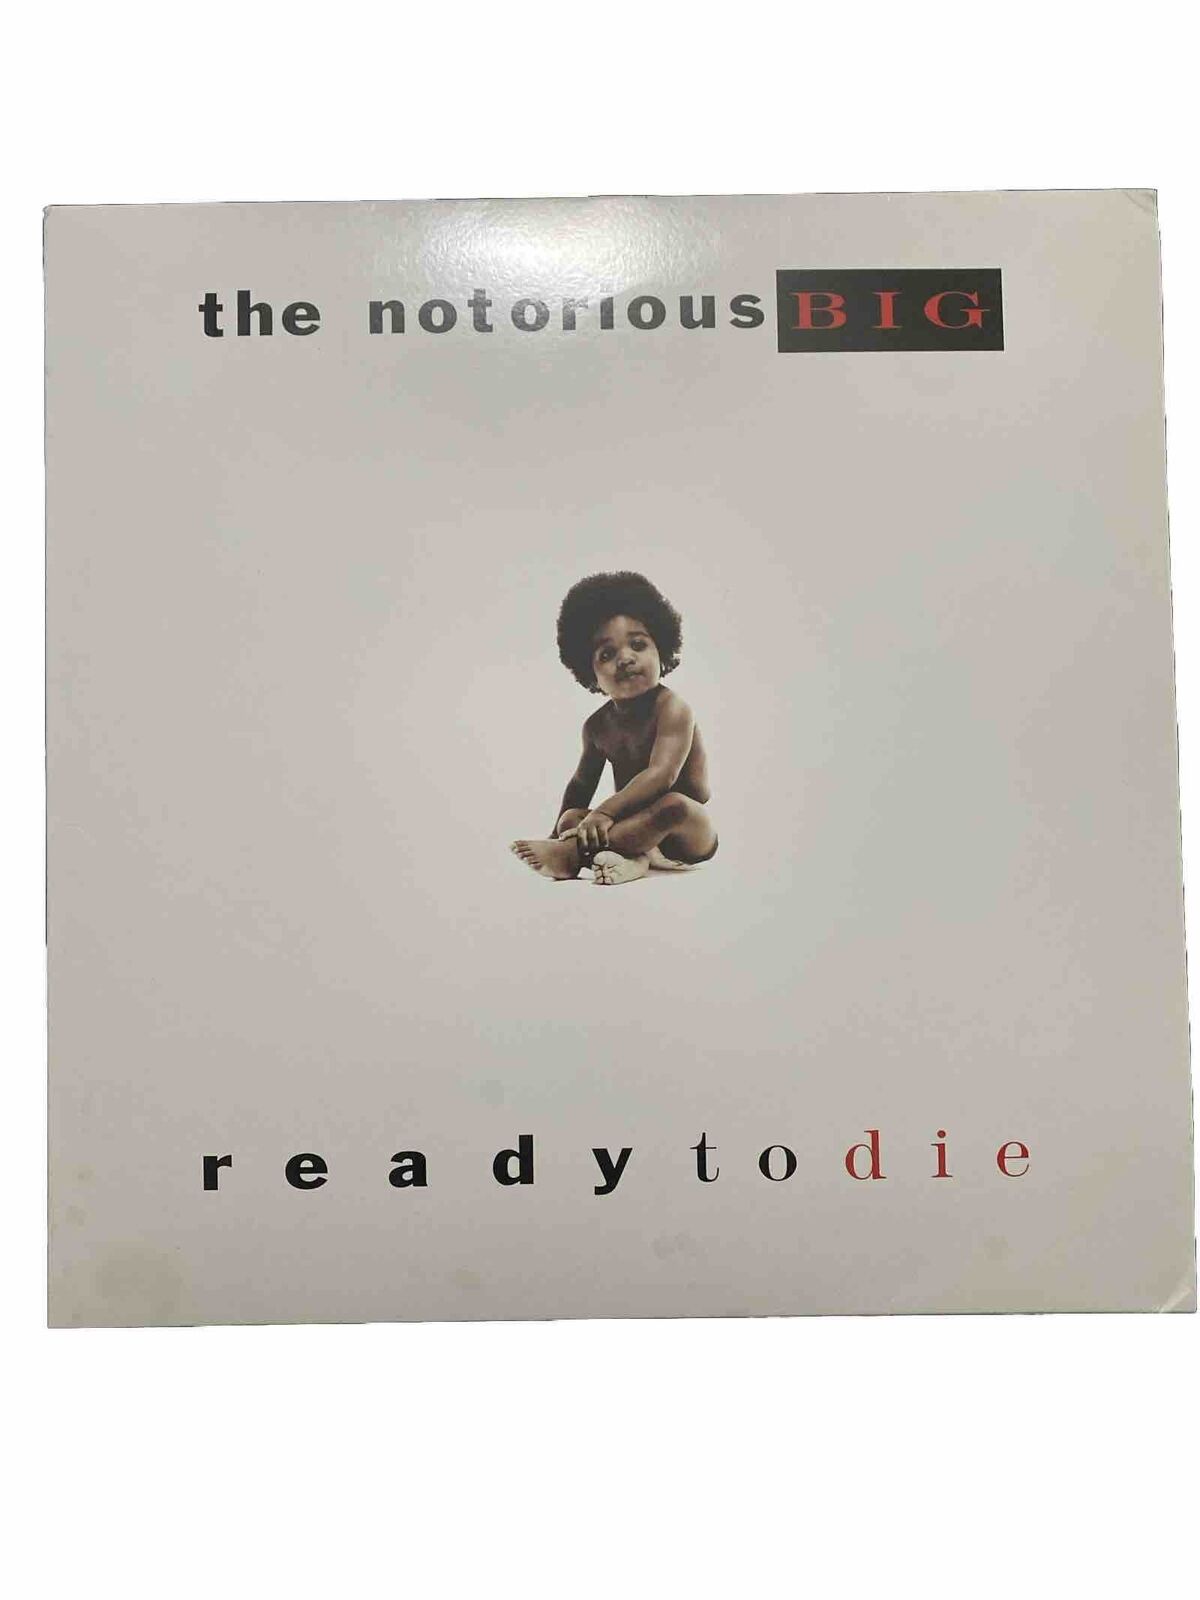 Ready To Die by Notorious B.I.G. (Record, 2021)